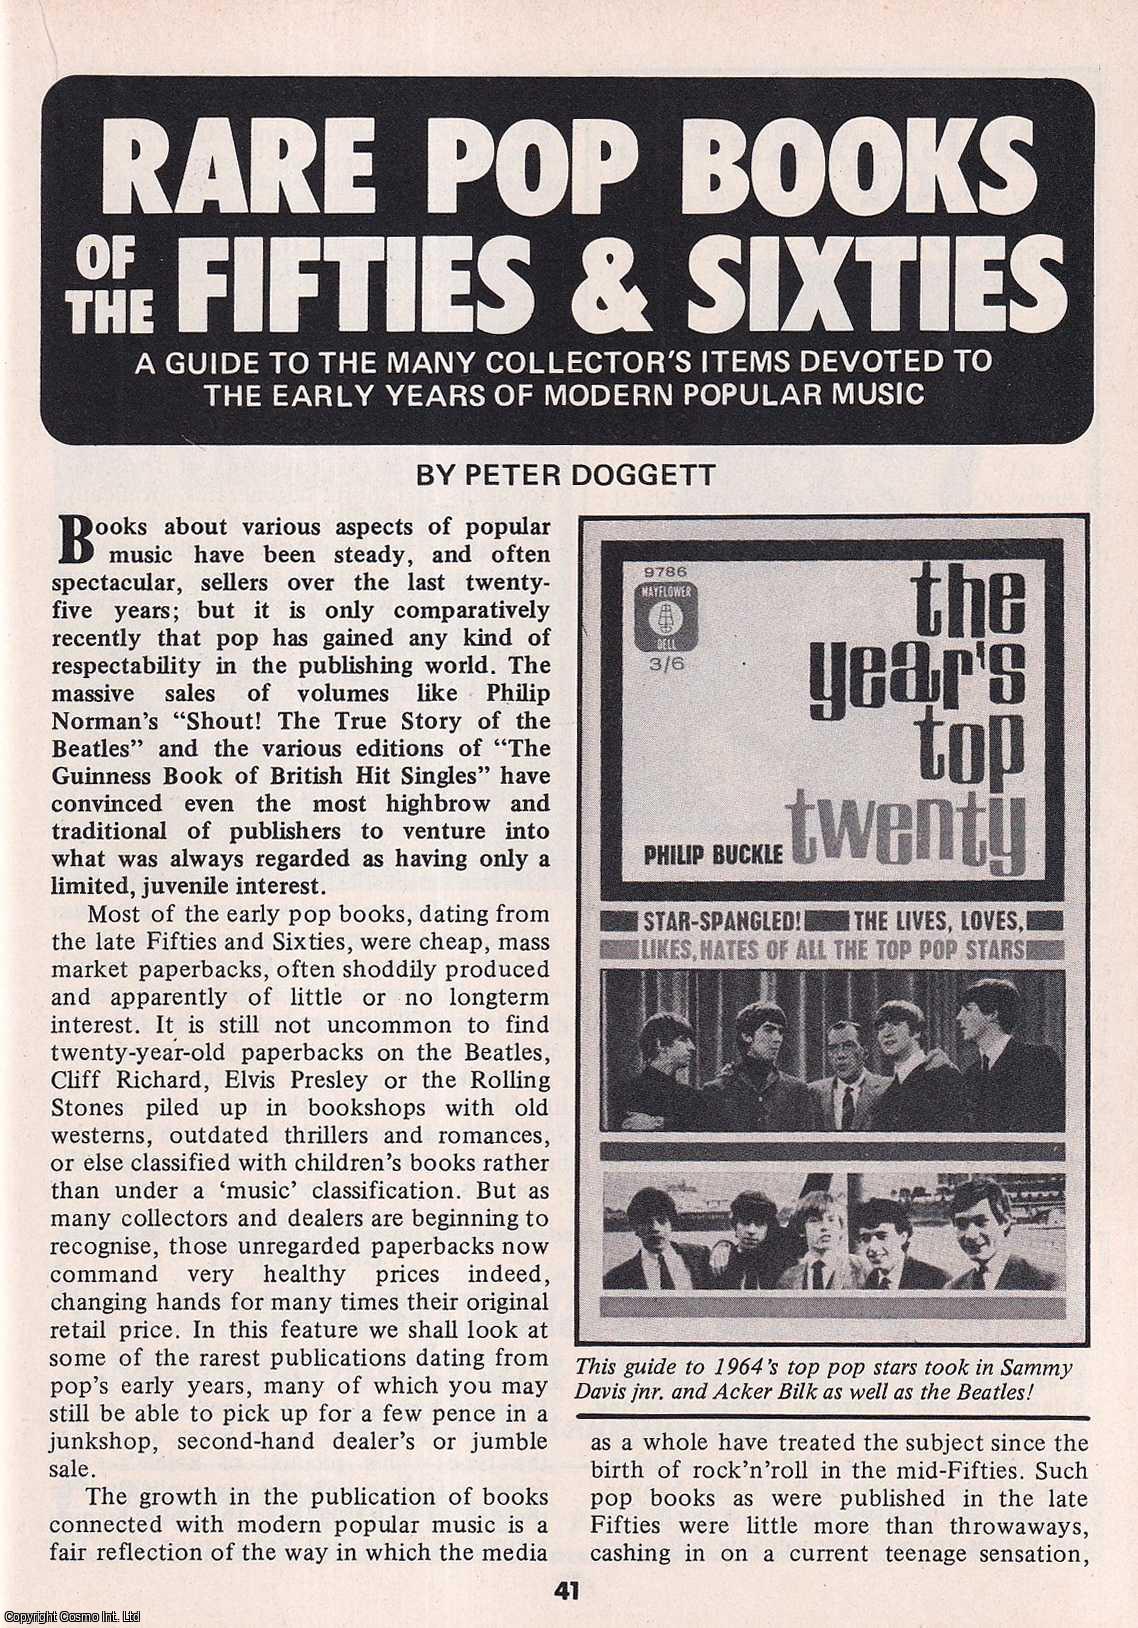 Peter Doggett - Original Pop Books of The Fifties & Sixties : A Guide to The Many Collector's Items Devoted to The Early Years of Modern Popular Music. This is an original article separated from an issue of The Book & Magazine Collector publication.